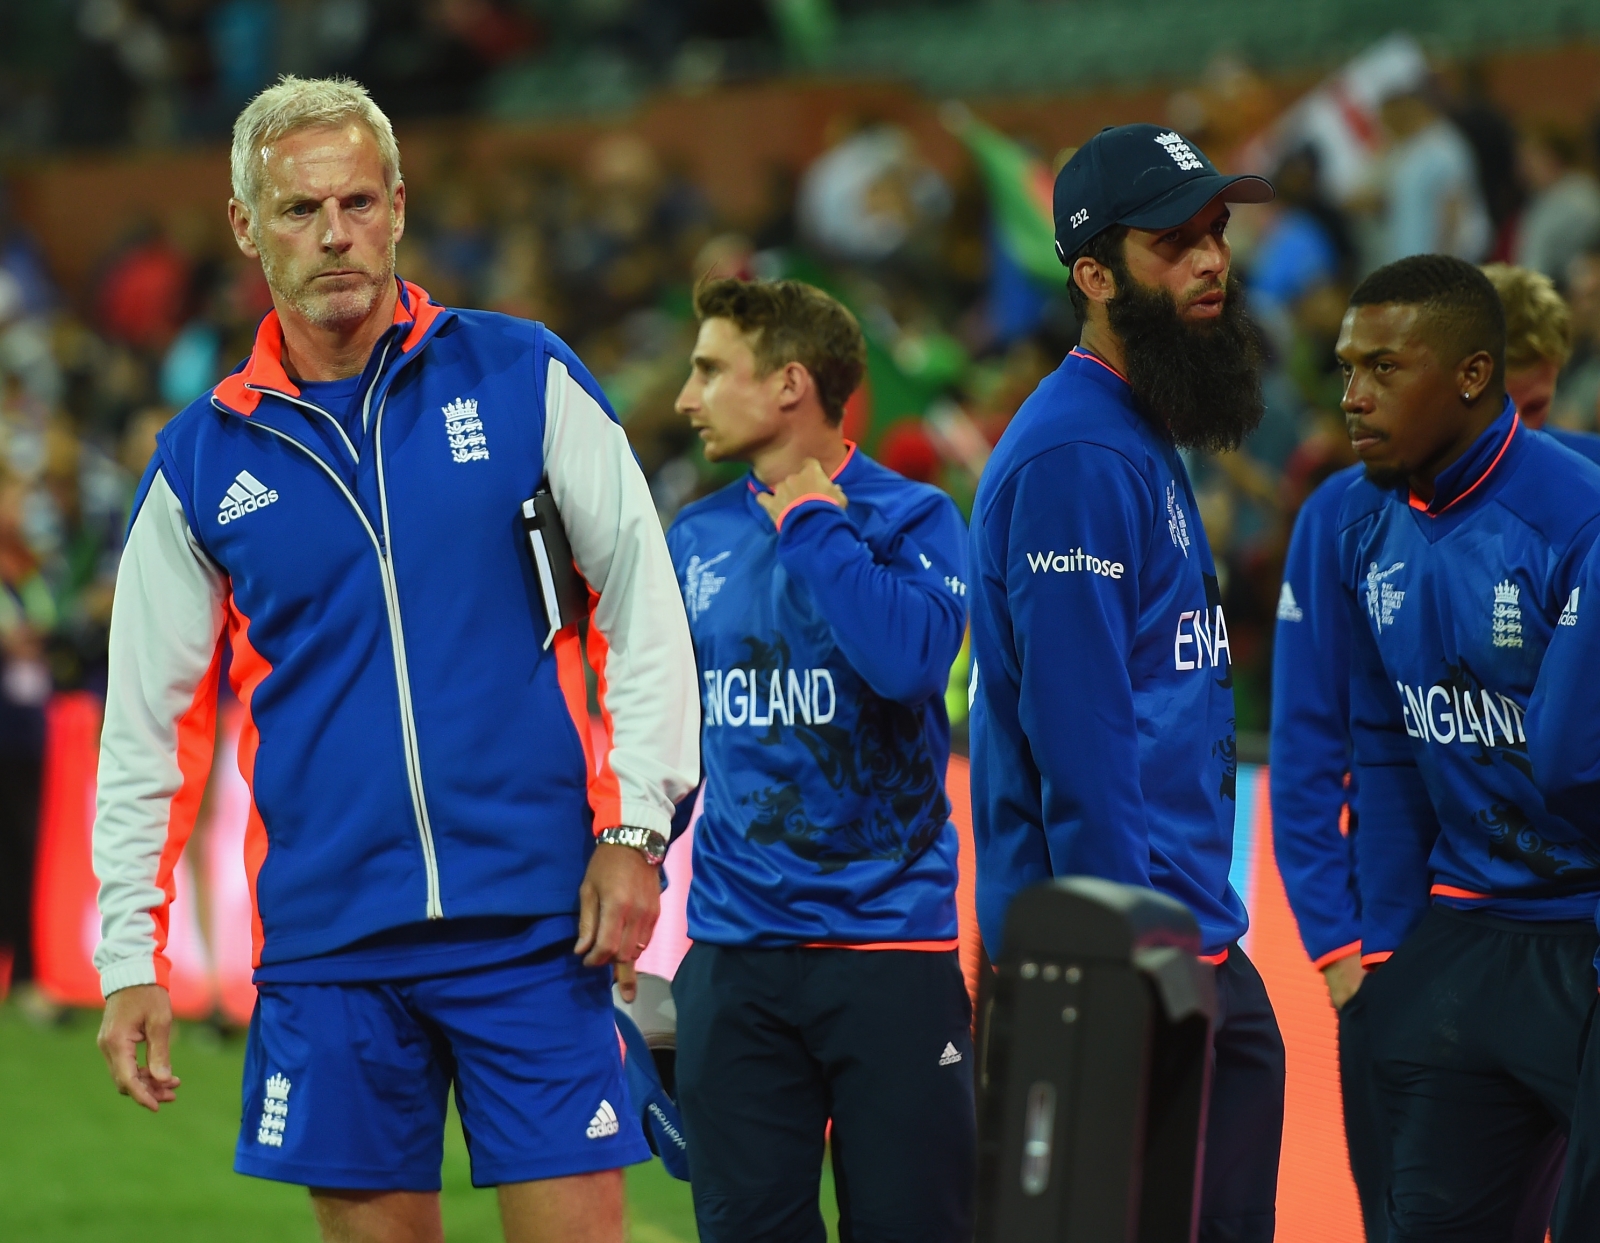 England Cricket World Cup exit concludes 12 months of hell ...